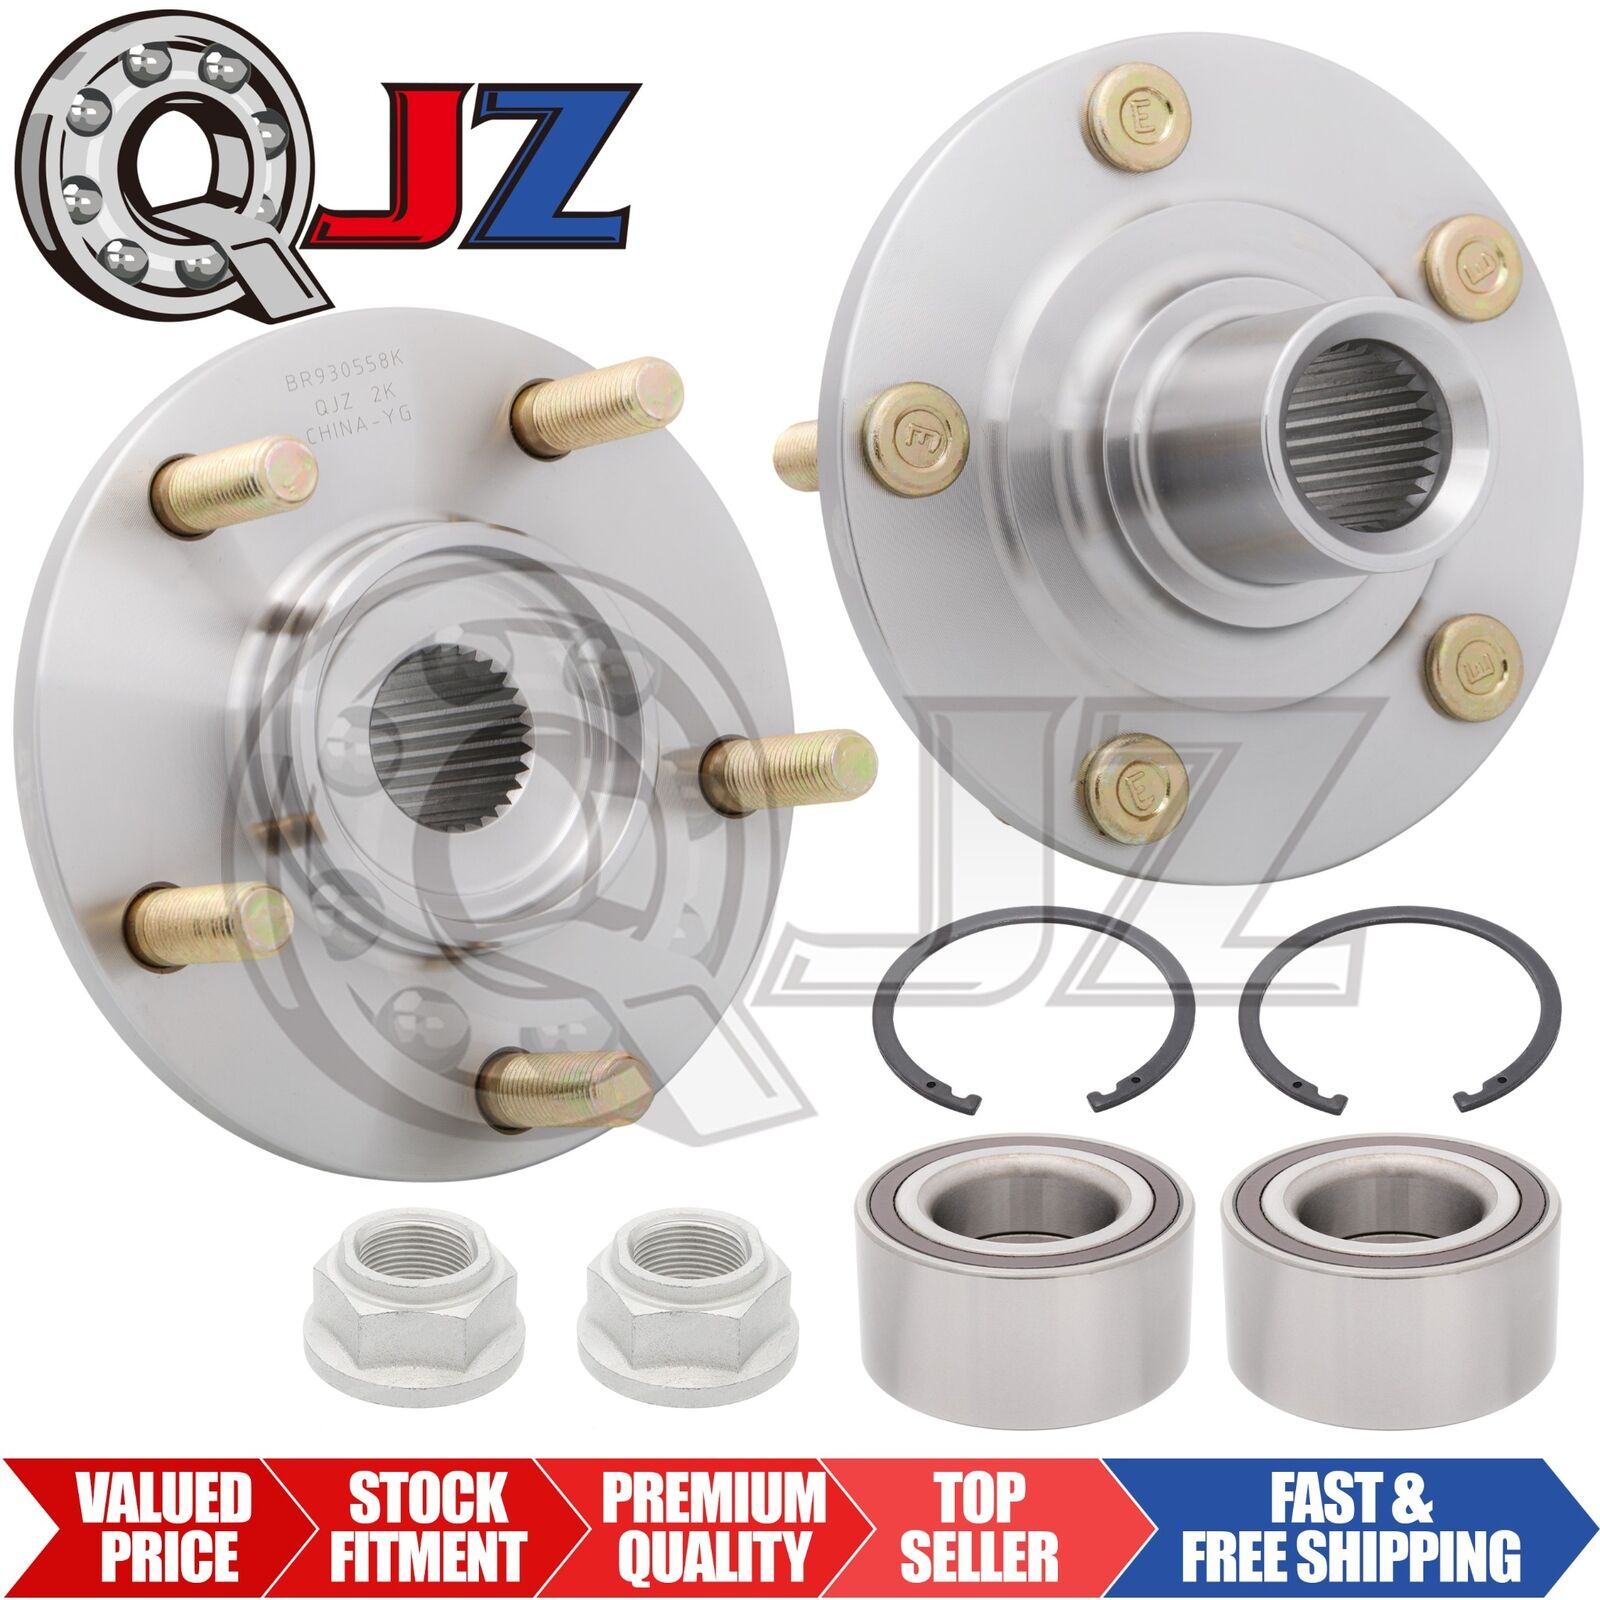 [FRONT(Qty.2)] Wheel Hub Repair Kit For 2007-2017 Jeep Patriot SUV AWD/FWD-Model